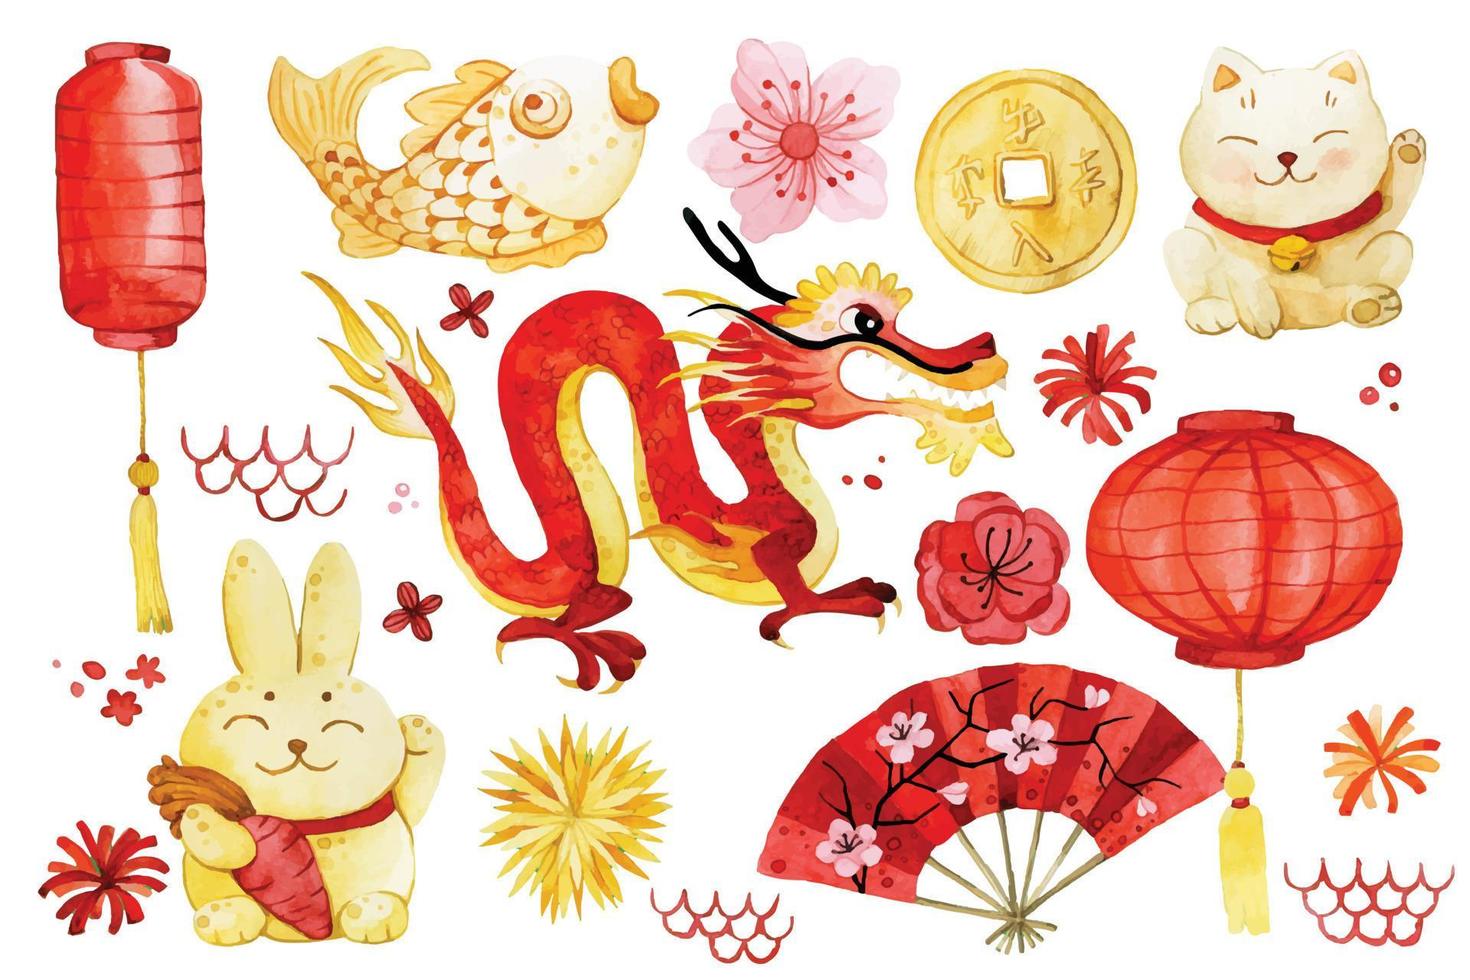 watercolor drawing. chinese new year clipart set. cute Chinese dragon drawings, lanterns, fireworks in red and gold color vector